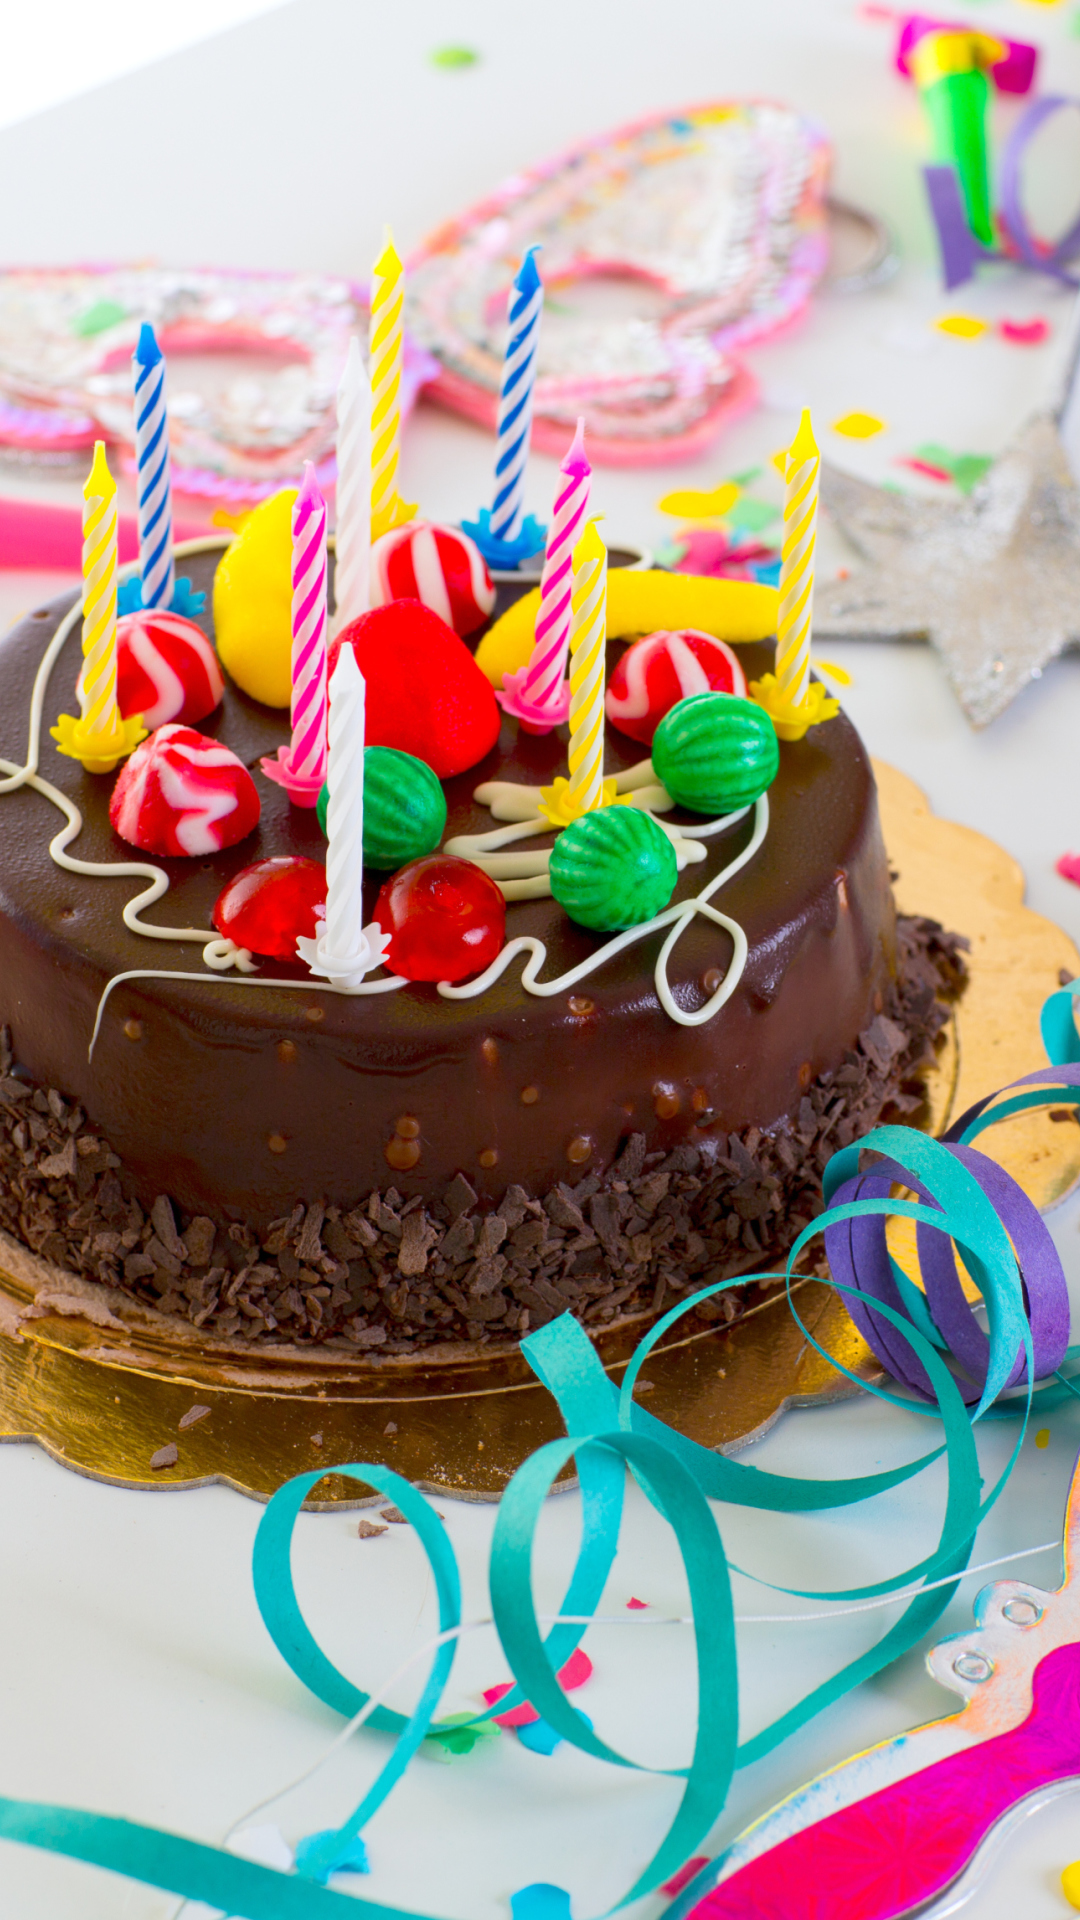 Das Birthday Cake With Candles Wallpaper 1080x1920